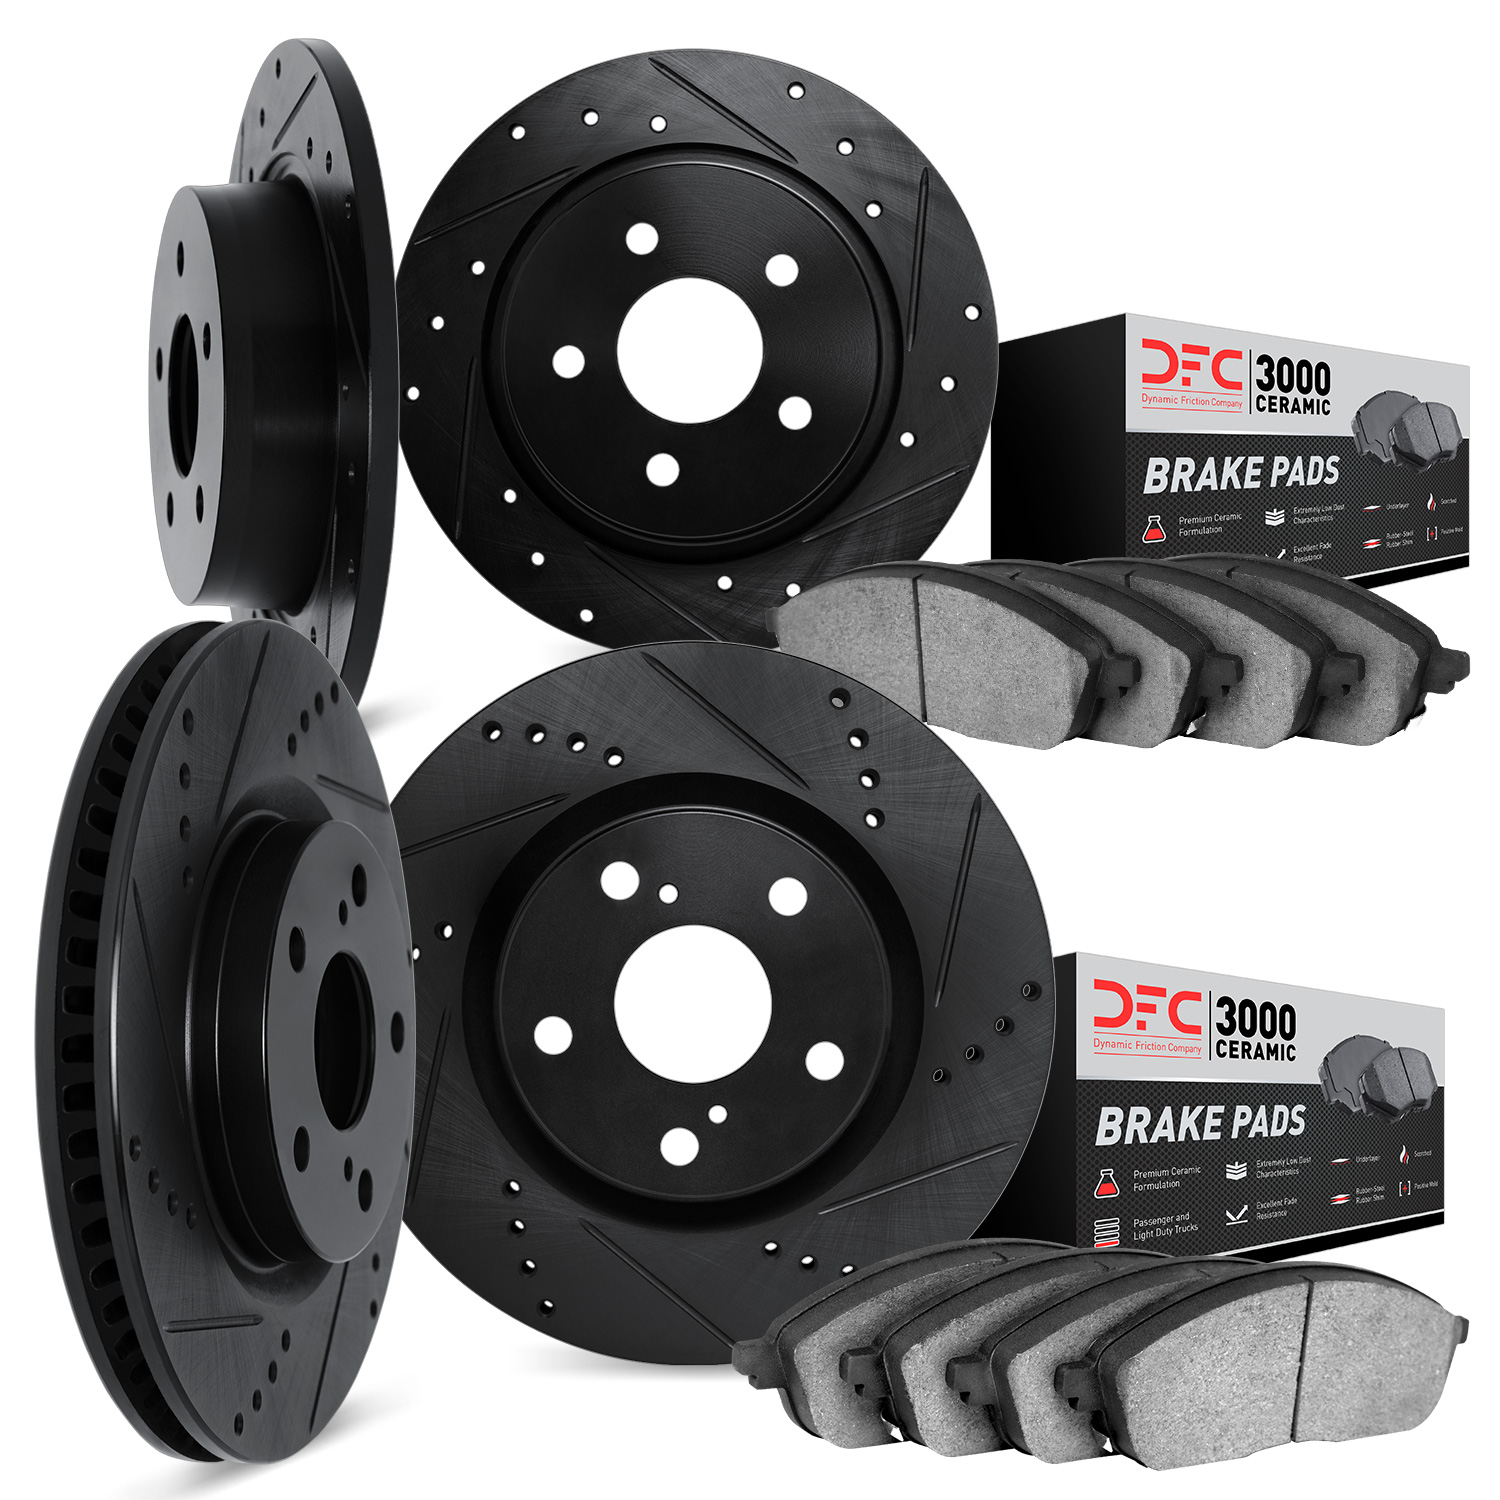 8304-42003 Drilled/Slotted Brake Rotors with 3000-Series Ceramic Brake Pads Kit [Black], 2003-2006 Mopar, Position: Front and Re